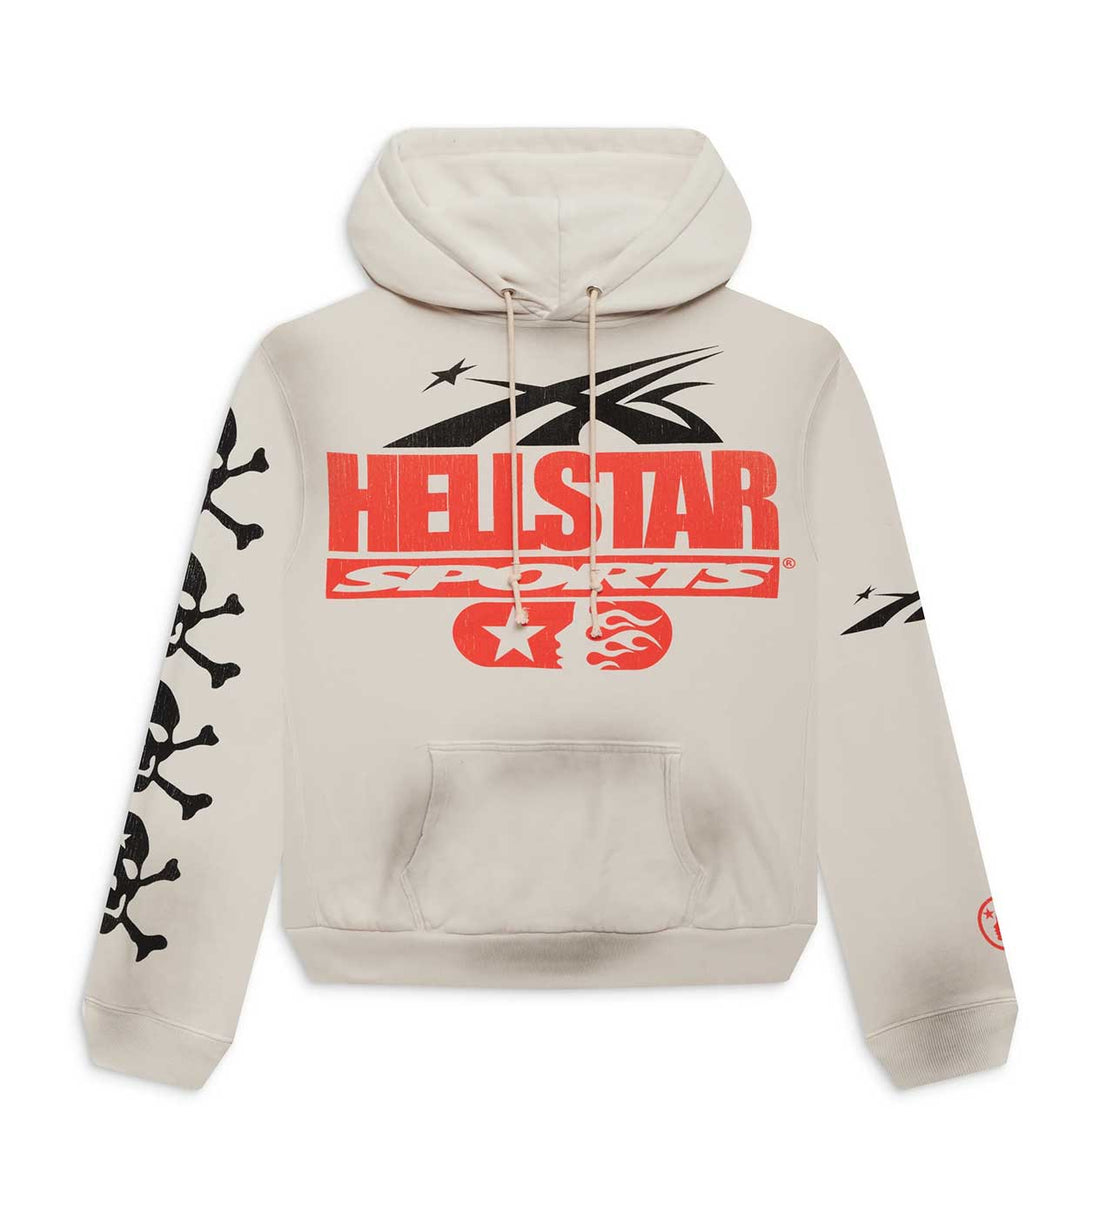 Hellstar Sports "Beat Us" Hoodie White Front View